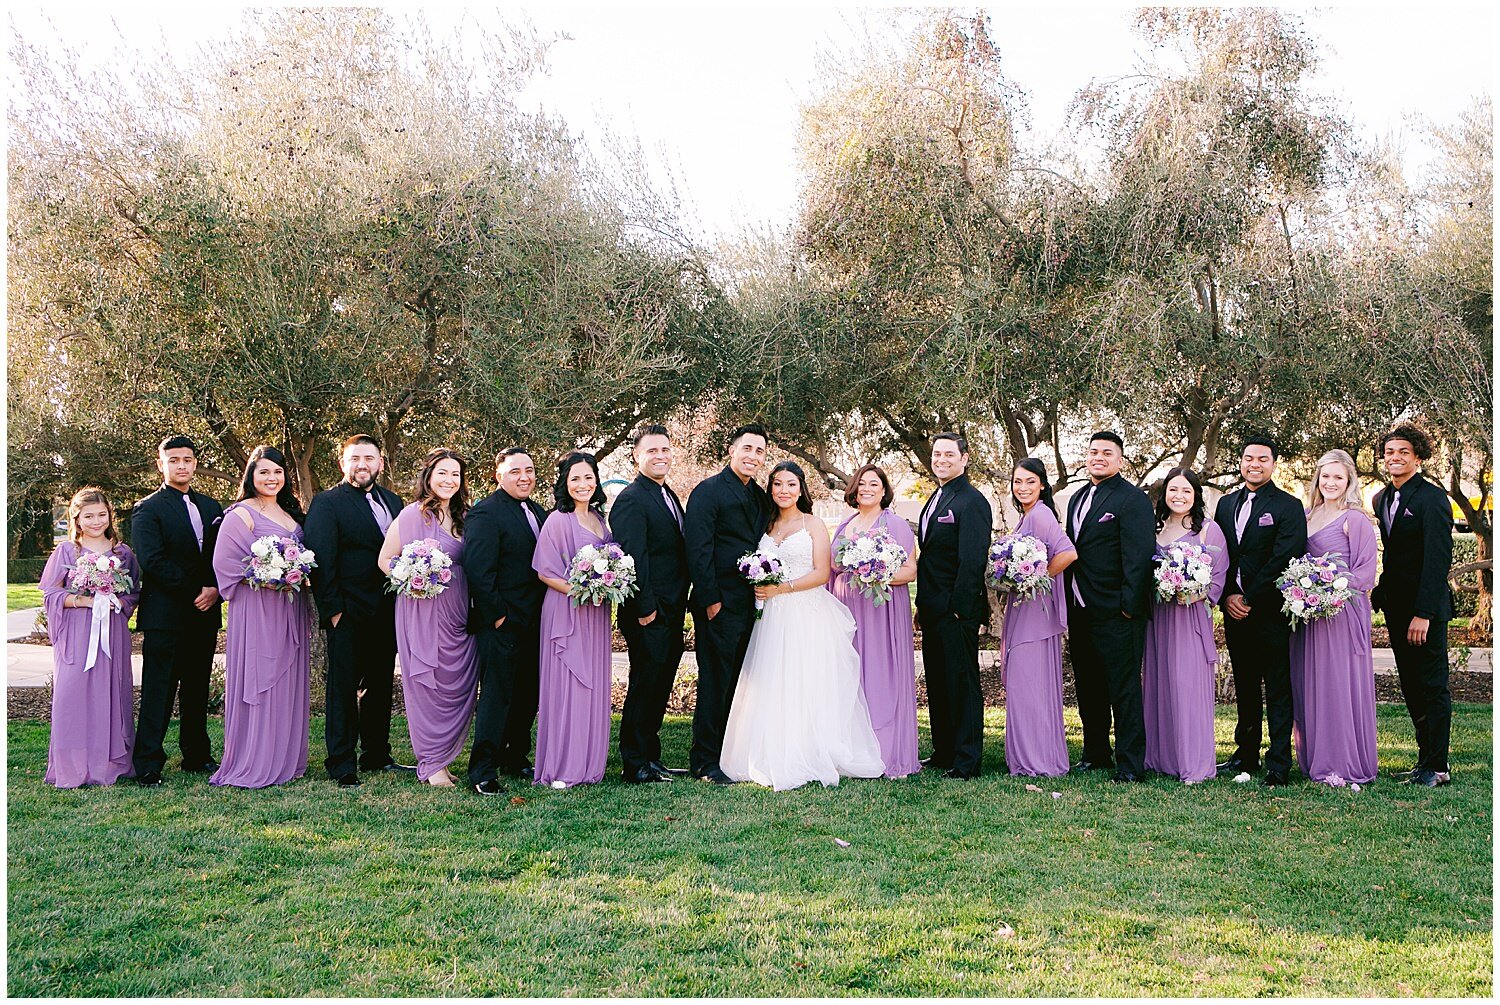 Large wedding party in black and purple